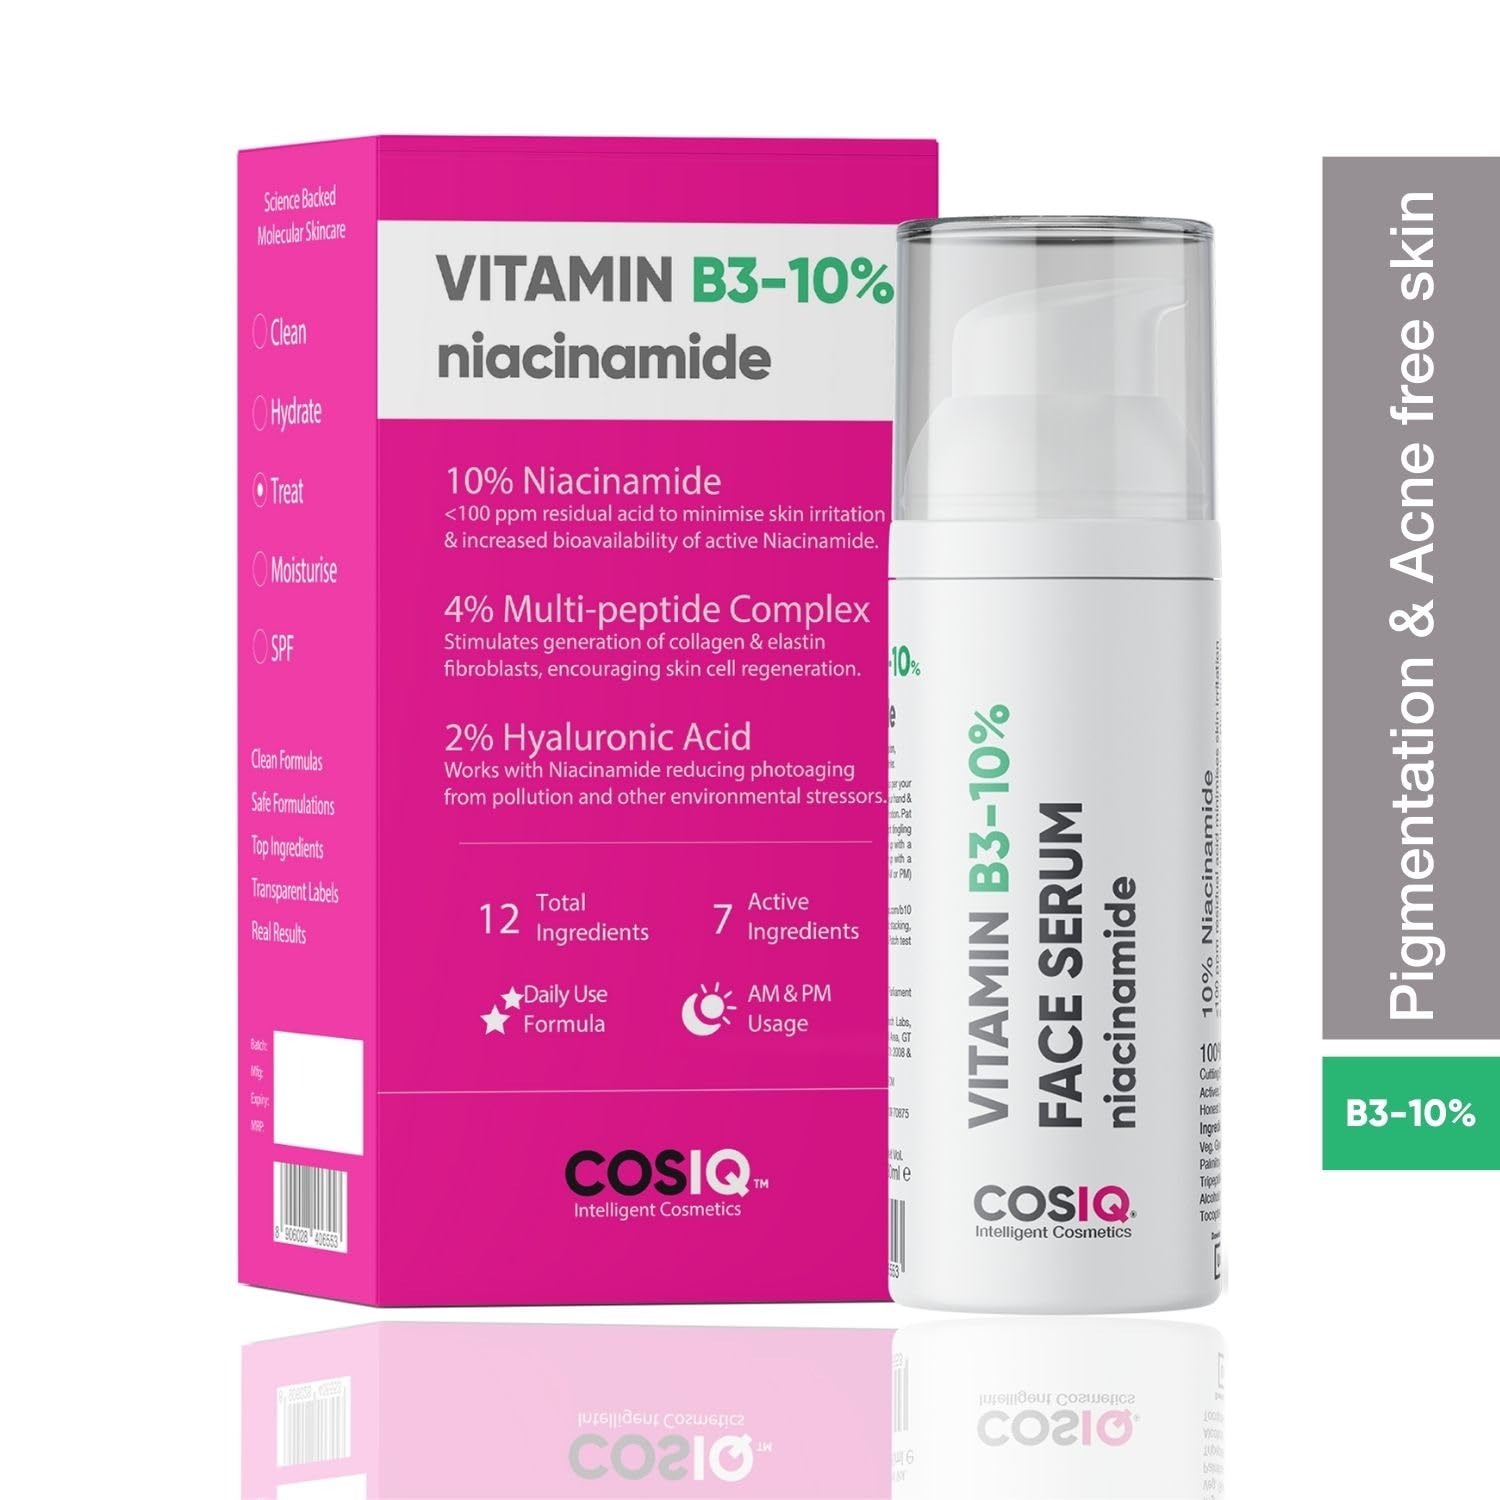 Cos-IQ 10% Niacinamide Face Serum for Acne Marks & Oil Balancing | Multi-Peptide Complex (4%) and Hyaluronic Acid (2%) | 30ml